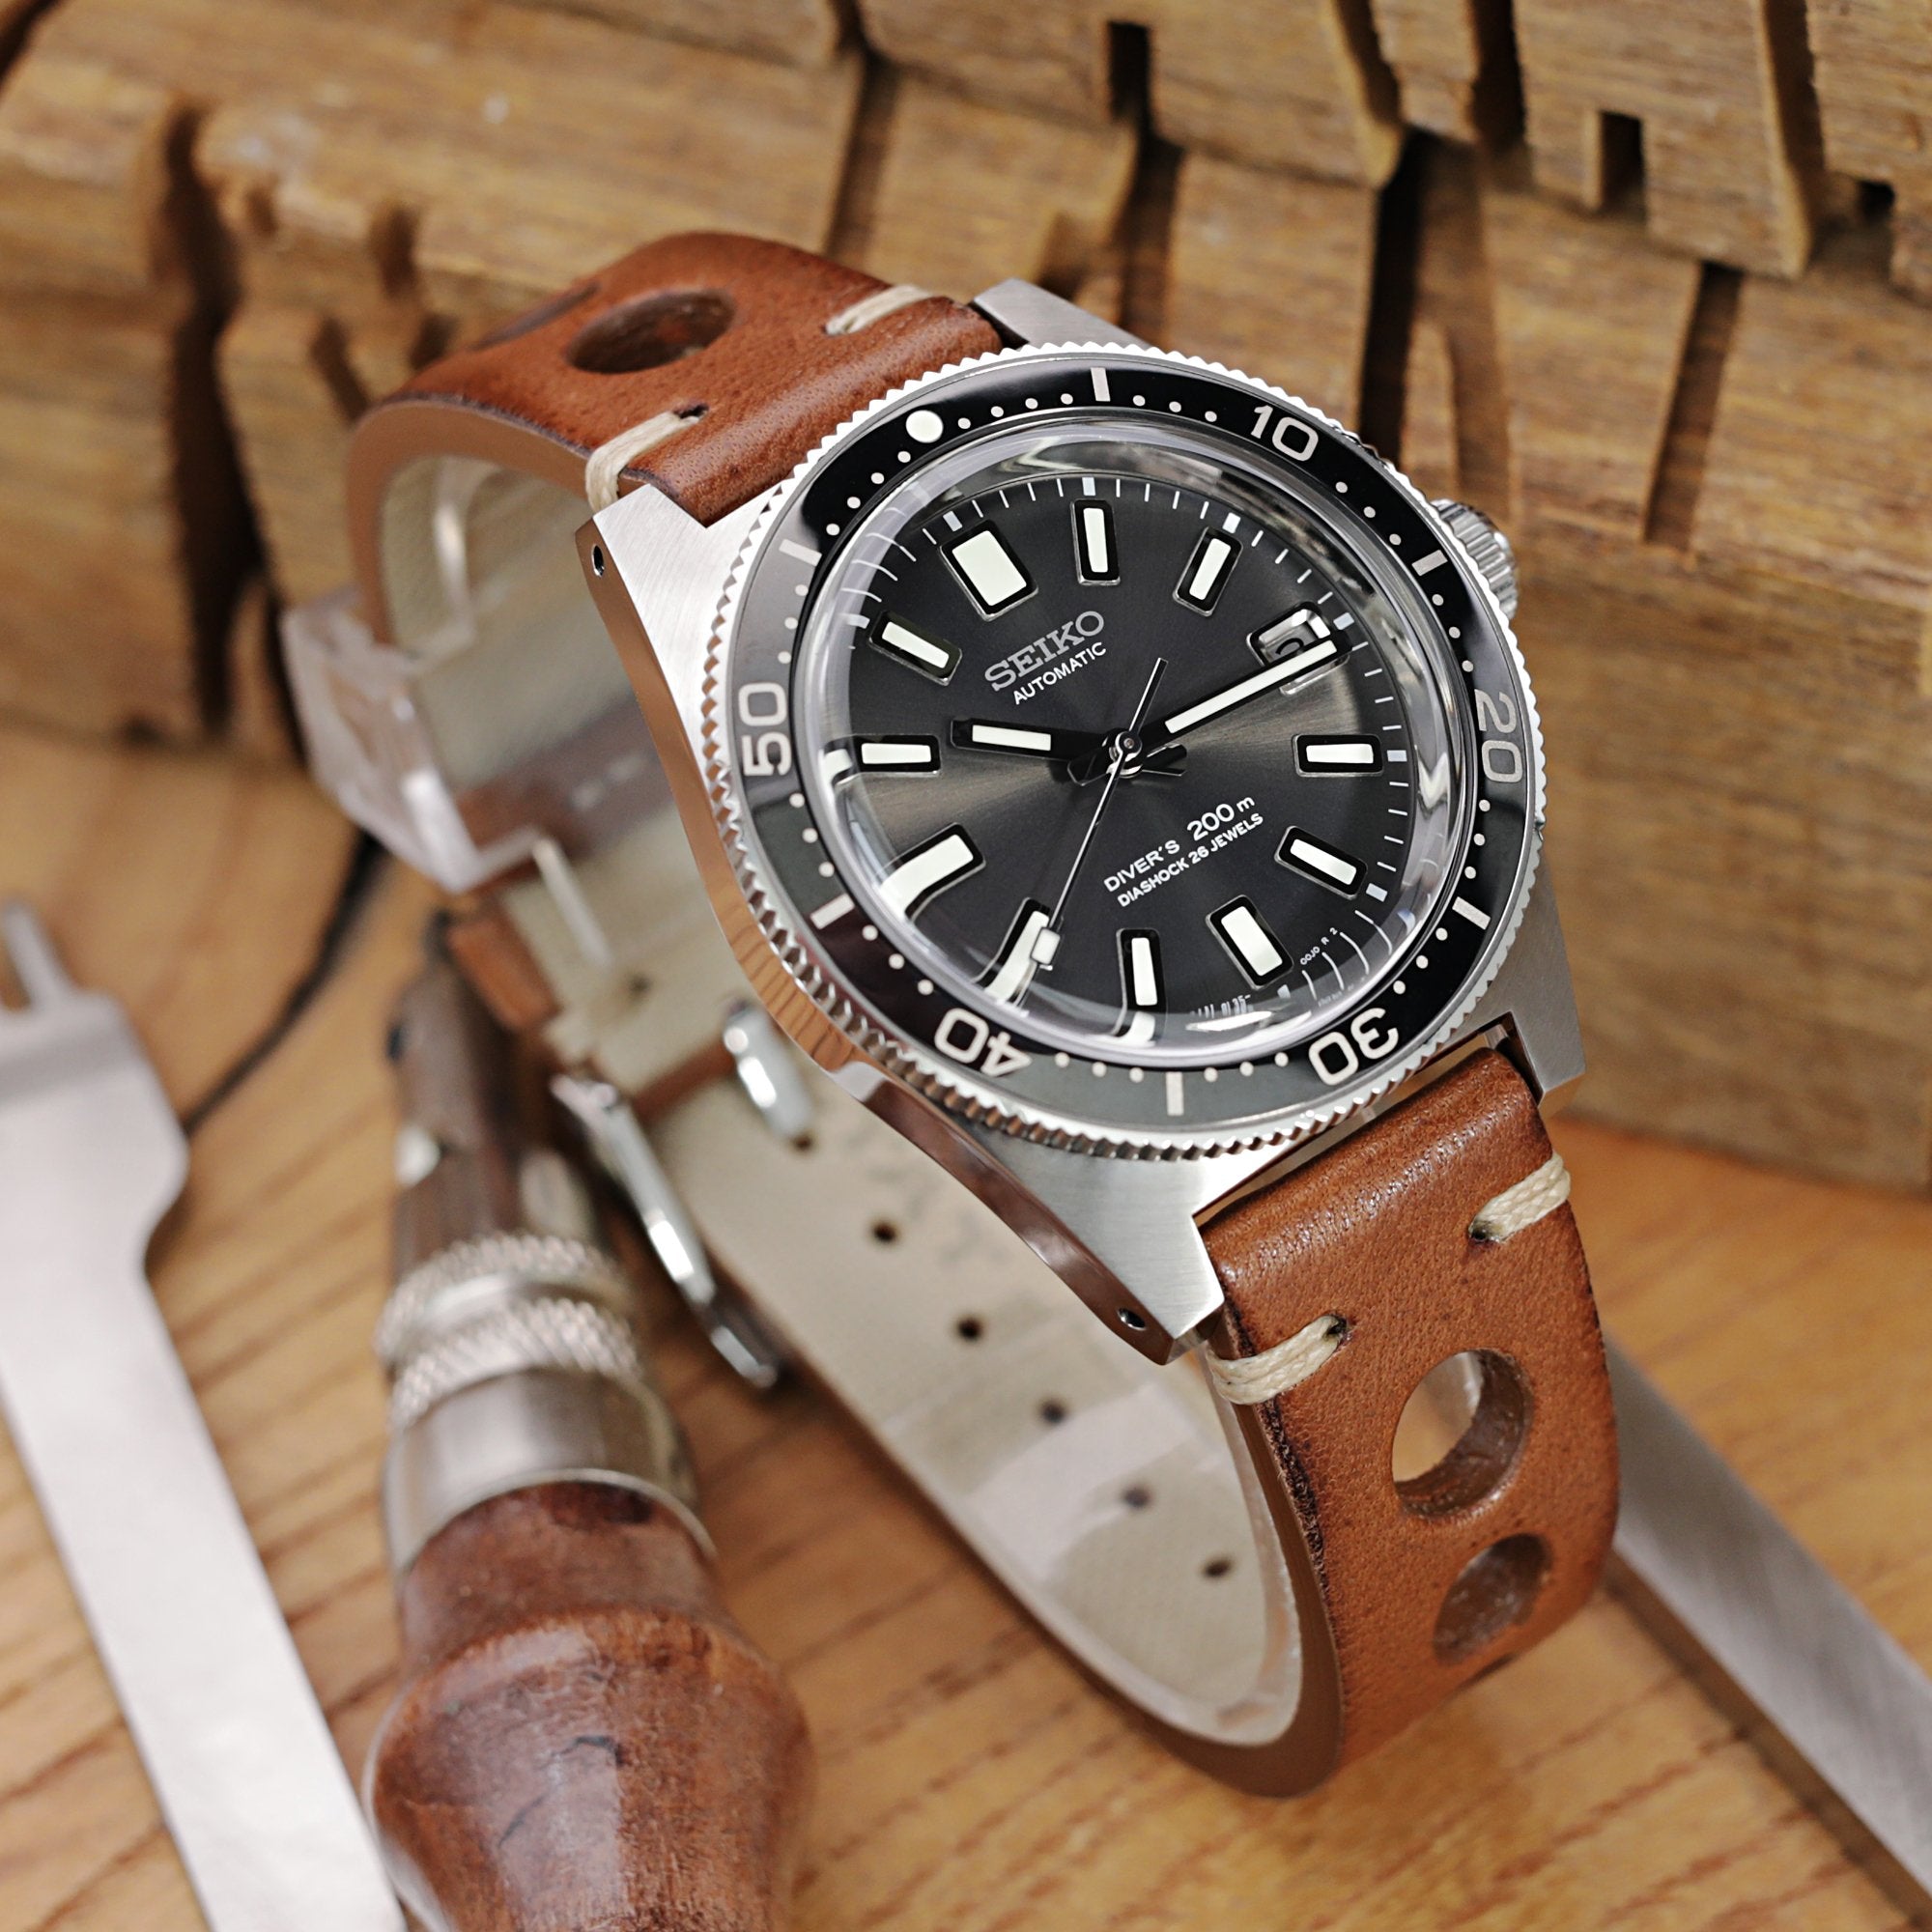 Watch Straps: Luxury Leather, Metal, Military & Dive Watch Bands